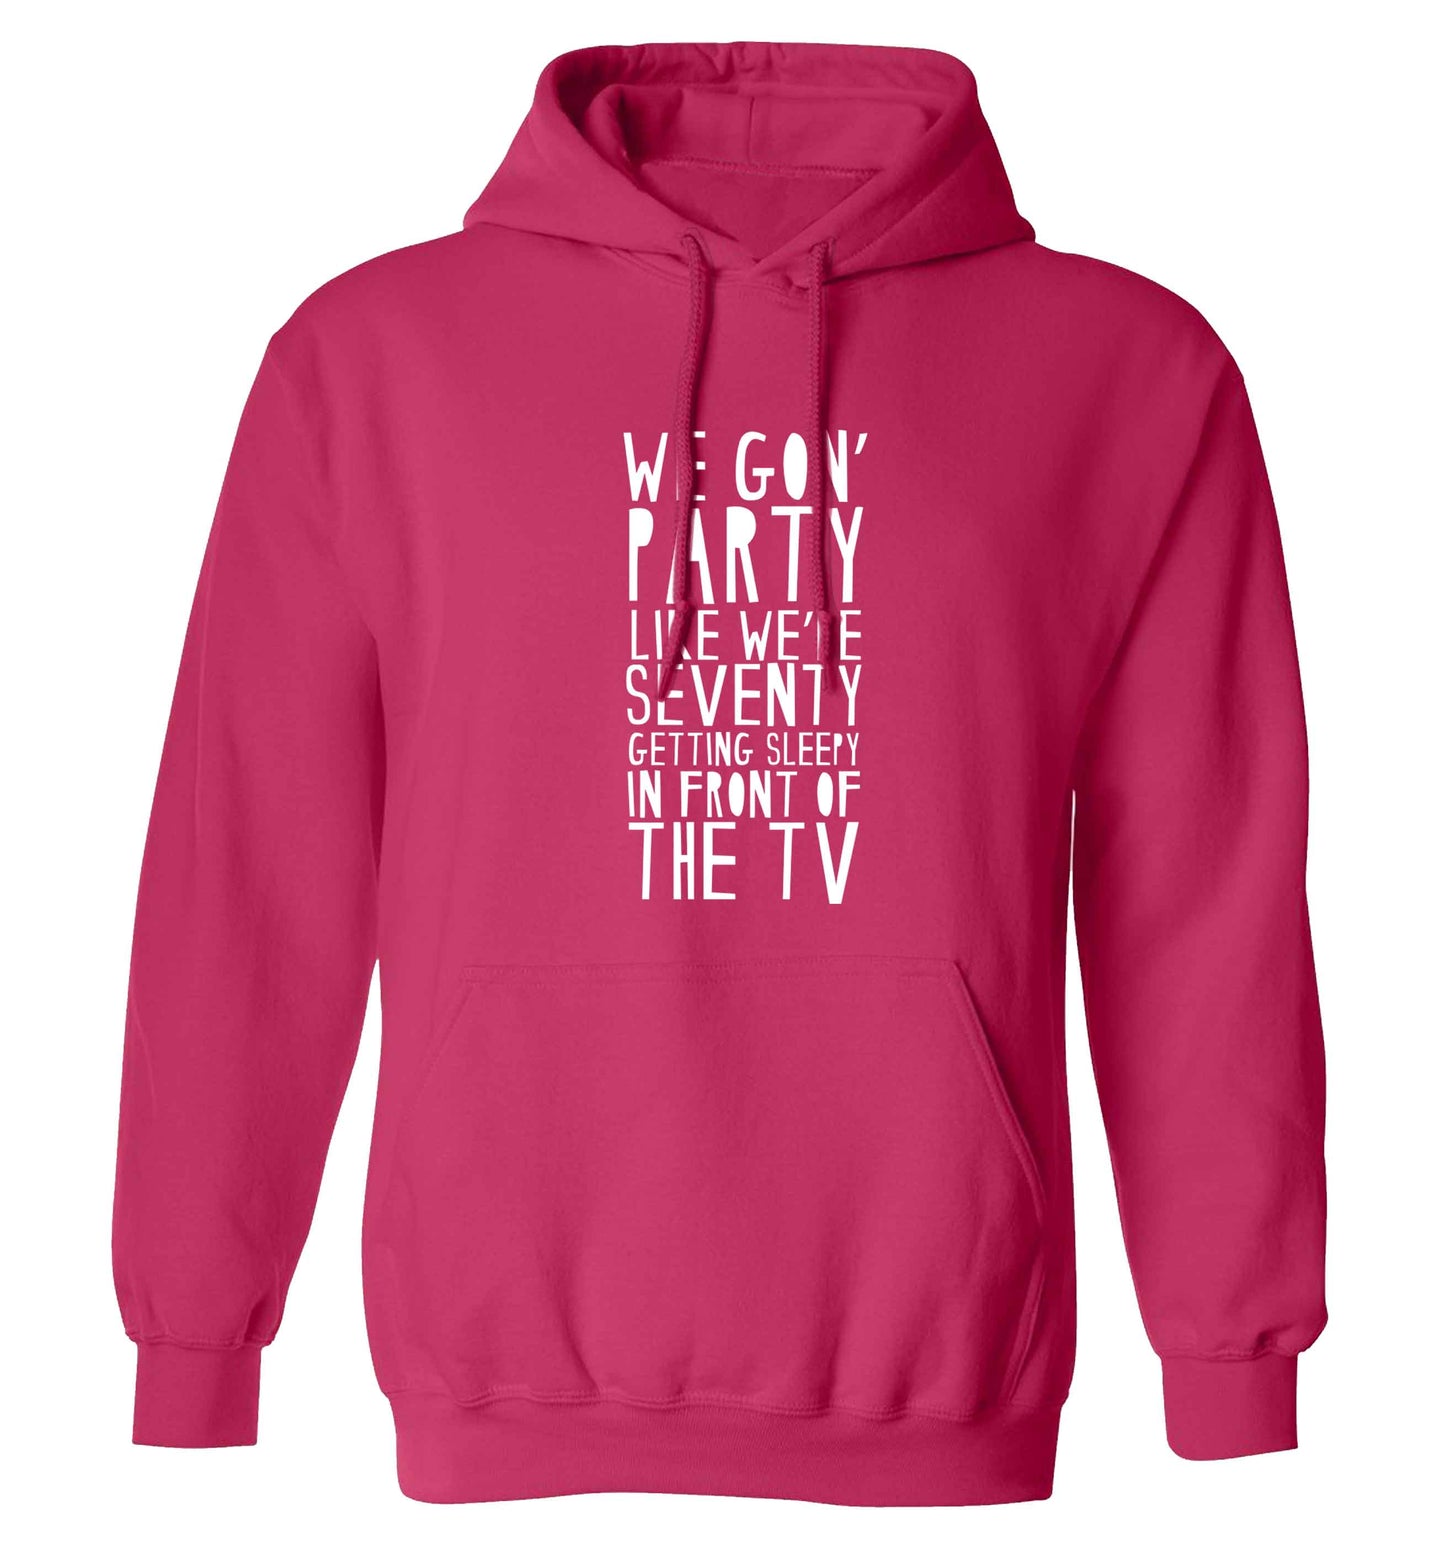 We gon' party like we're seventy getting sleepy in front of the TV adults unisex pink hoodie 2XL